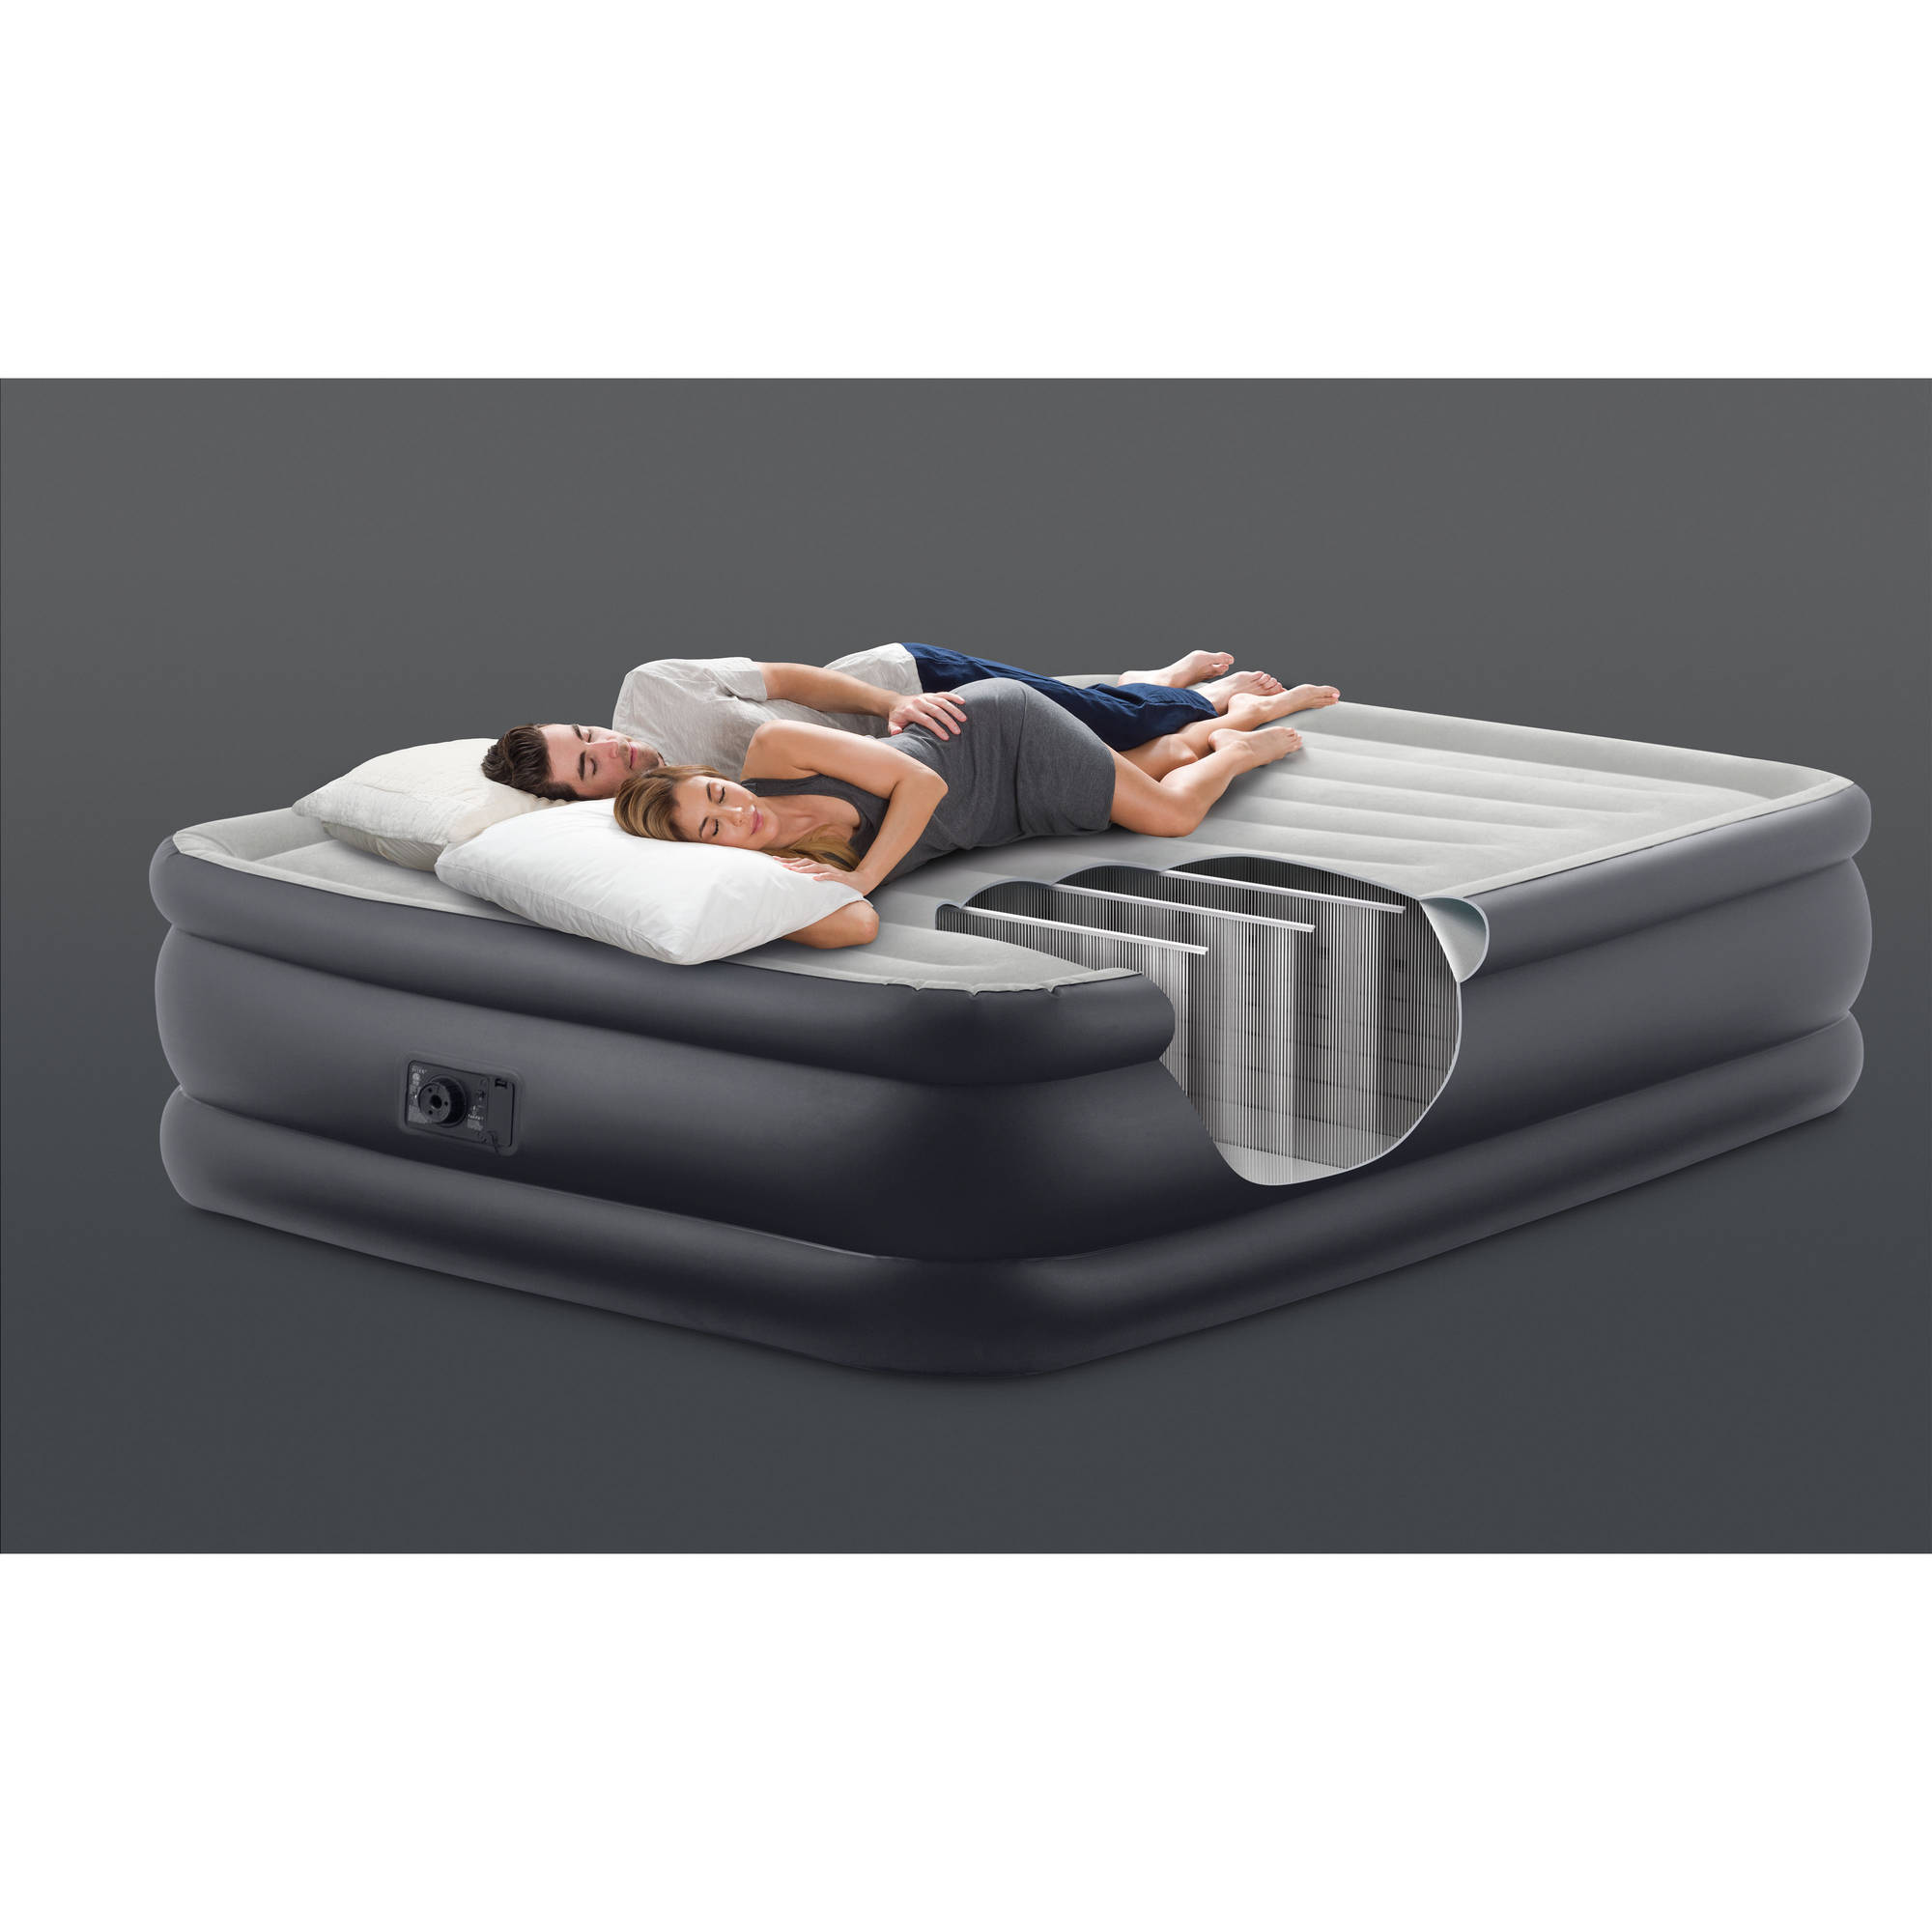 Intex 22" Queen Raised Downy Fiber-Tech Airbed with Built-In Pump - image 3 of 4